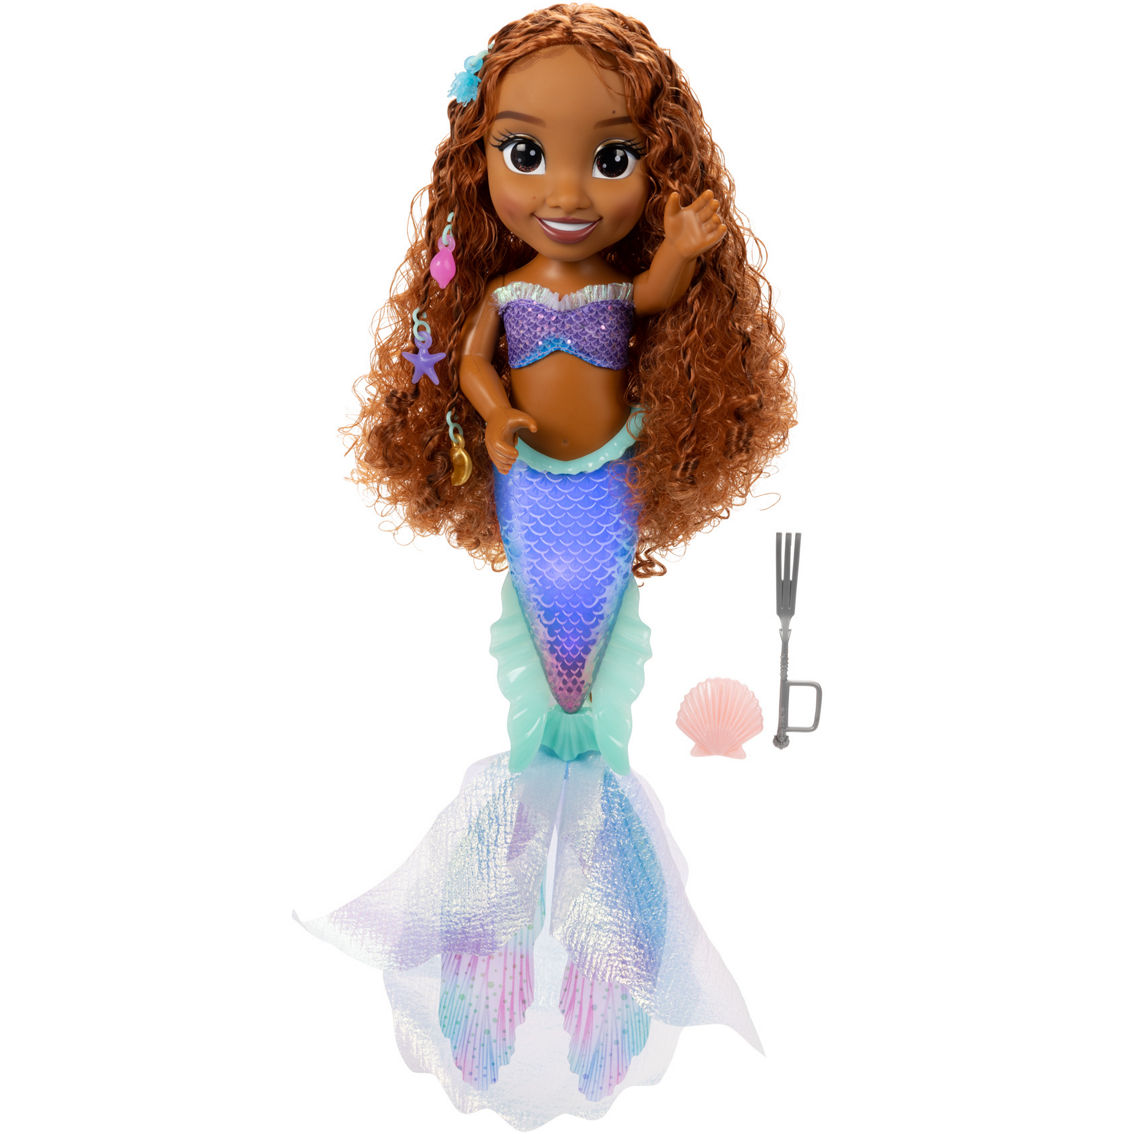 Disney Little Mermaid Live Action Ariel Feature Large Doll - Image 2 of 3